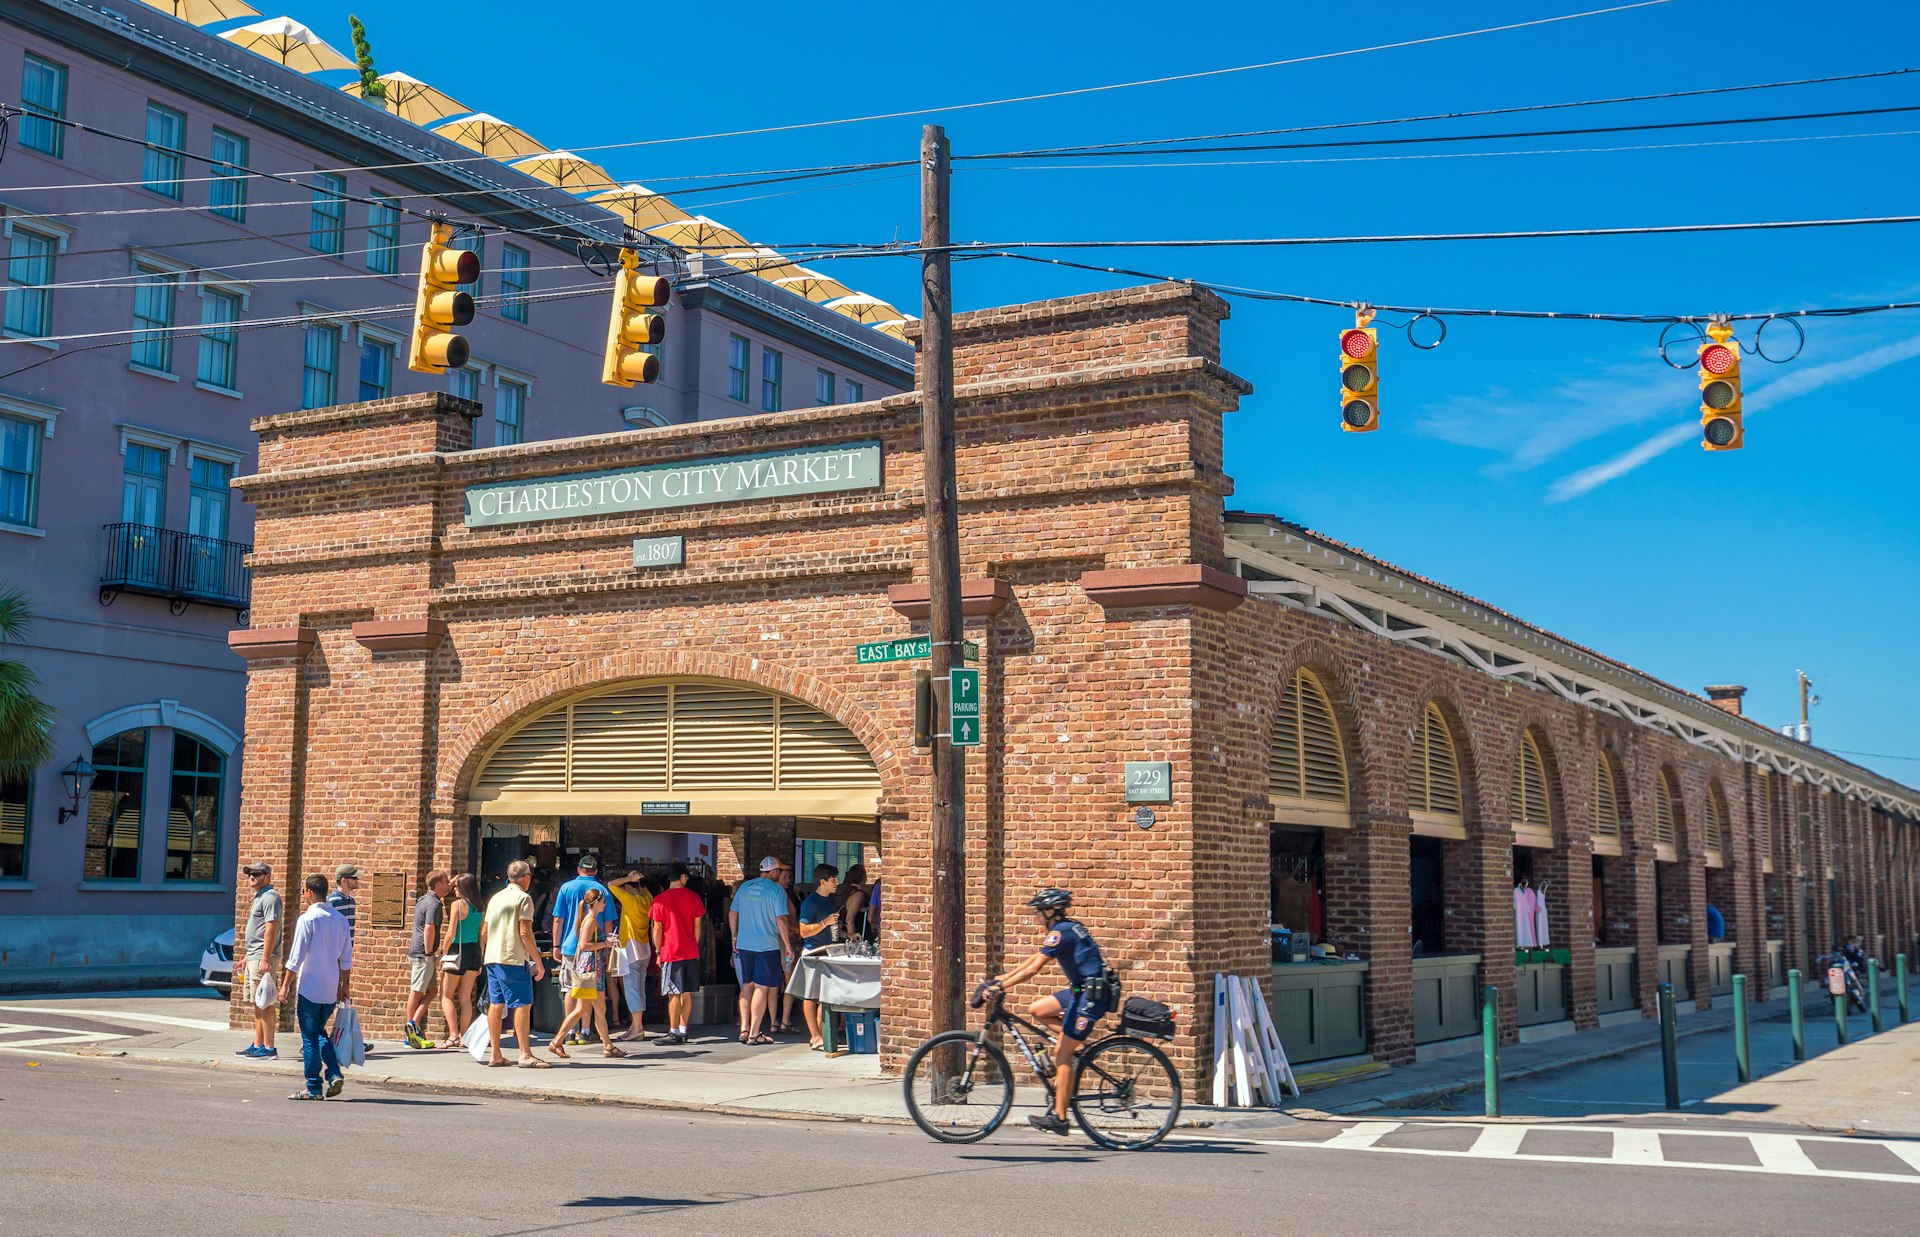 Shoppers gather at the historic Charleston City Market